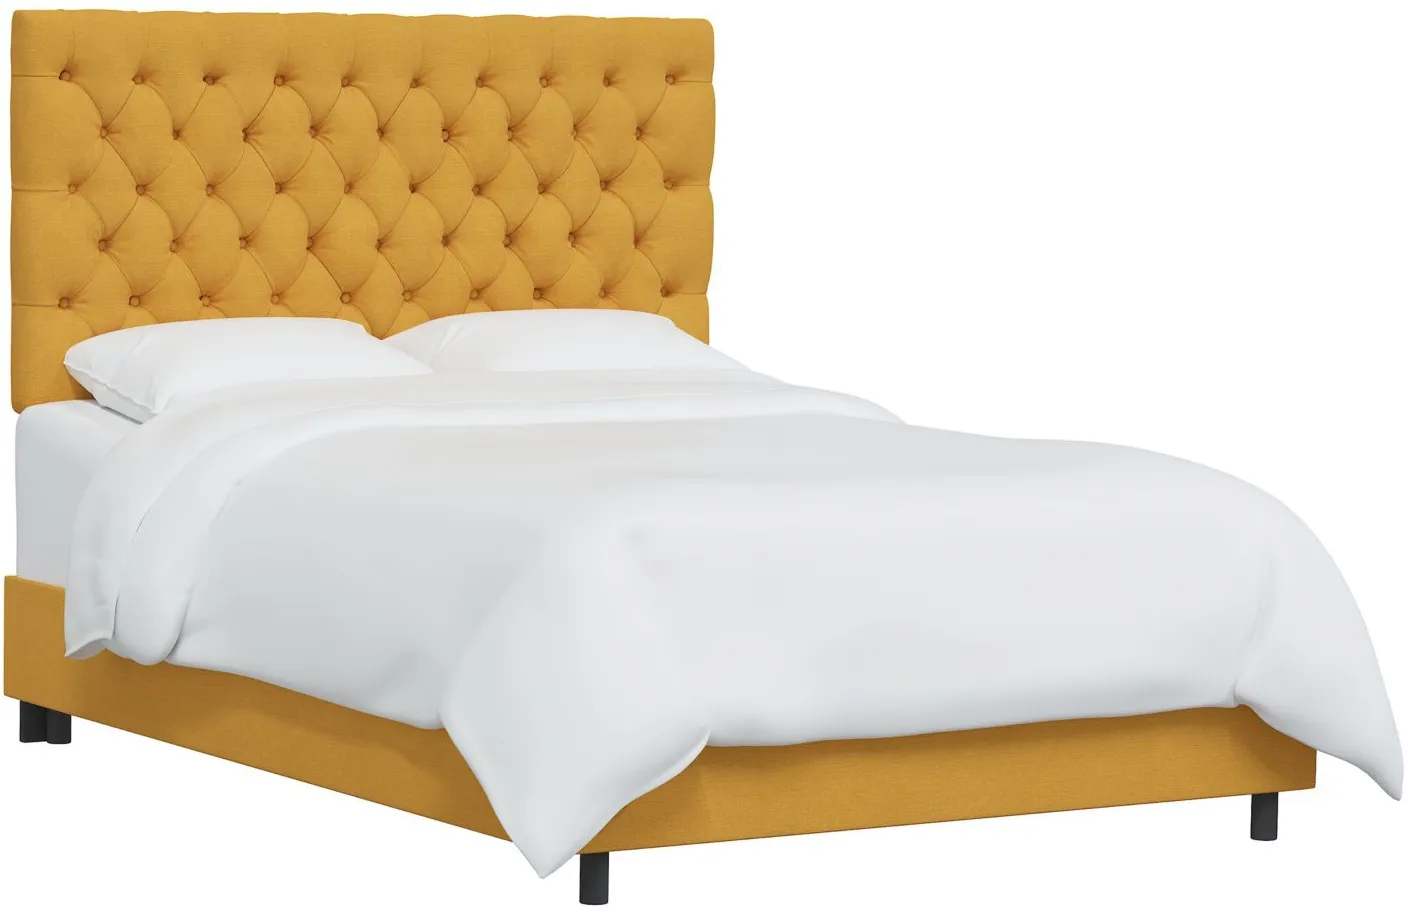 Queensbury Bed in Linen French Yellow by Skyline